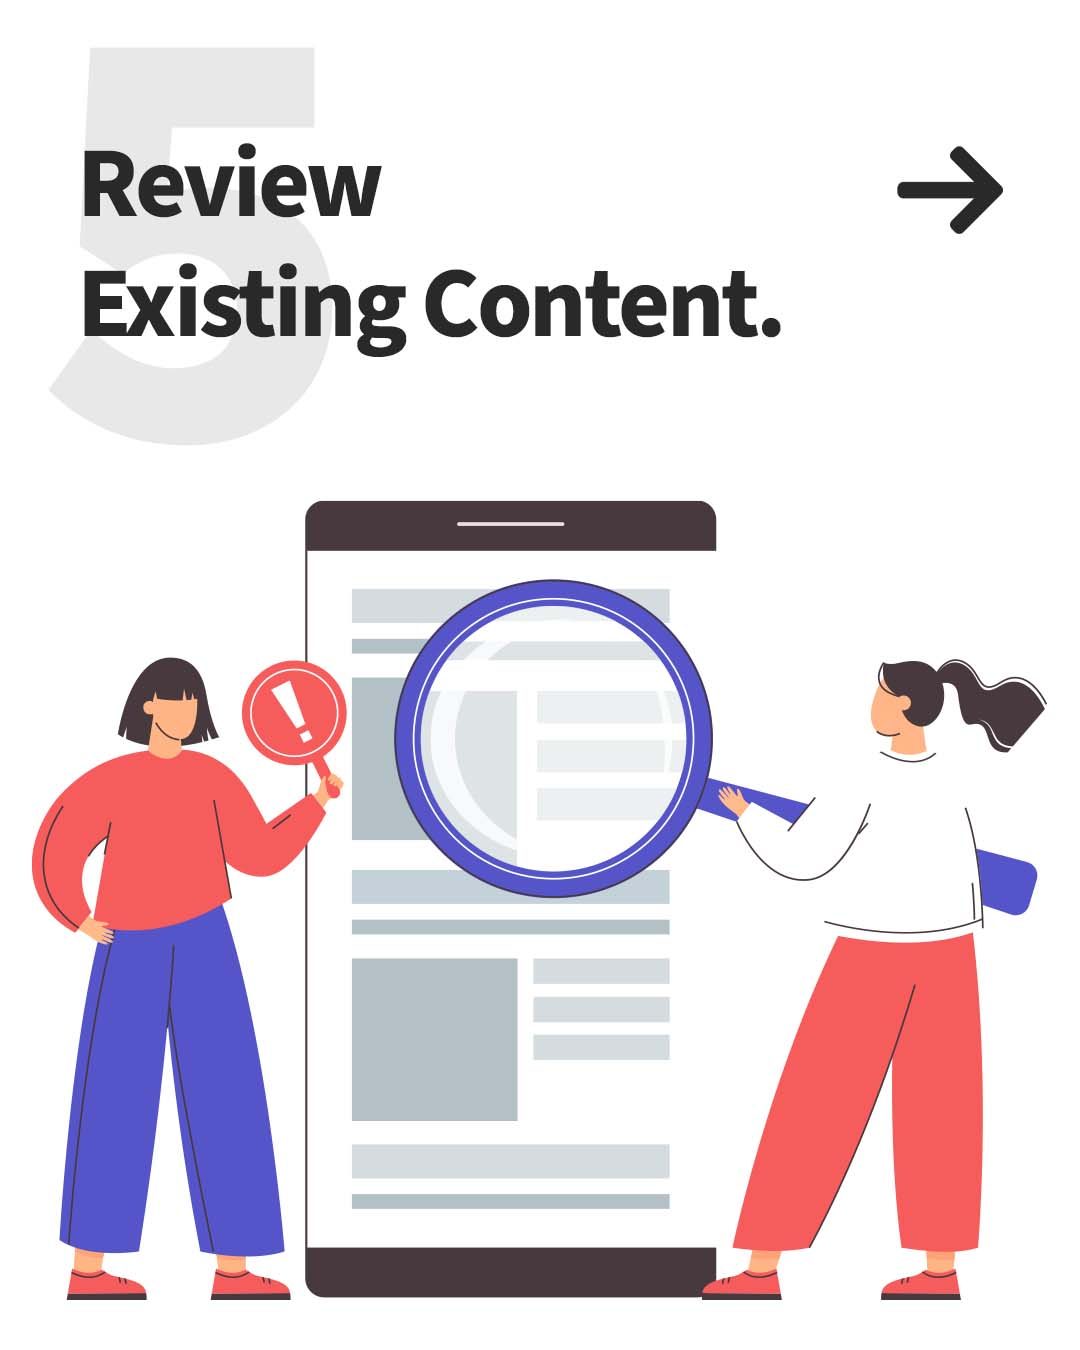 5. Review Existing Content